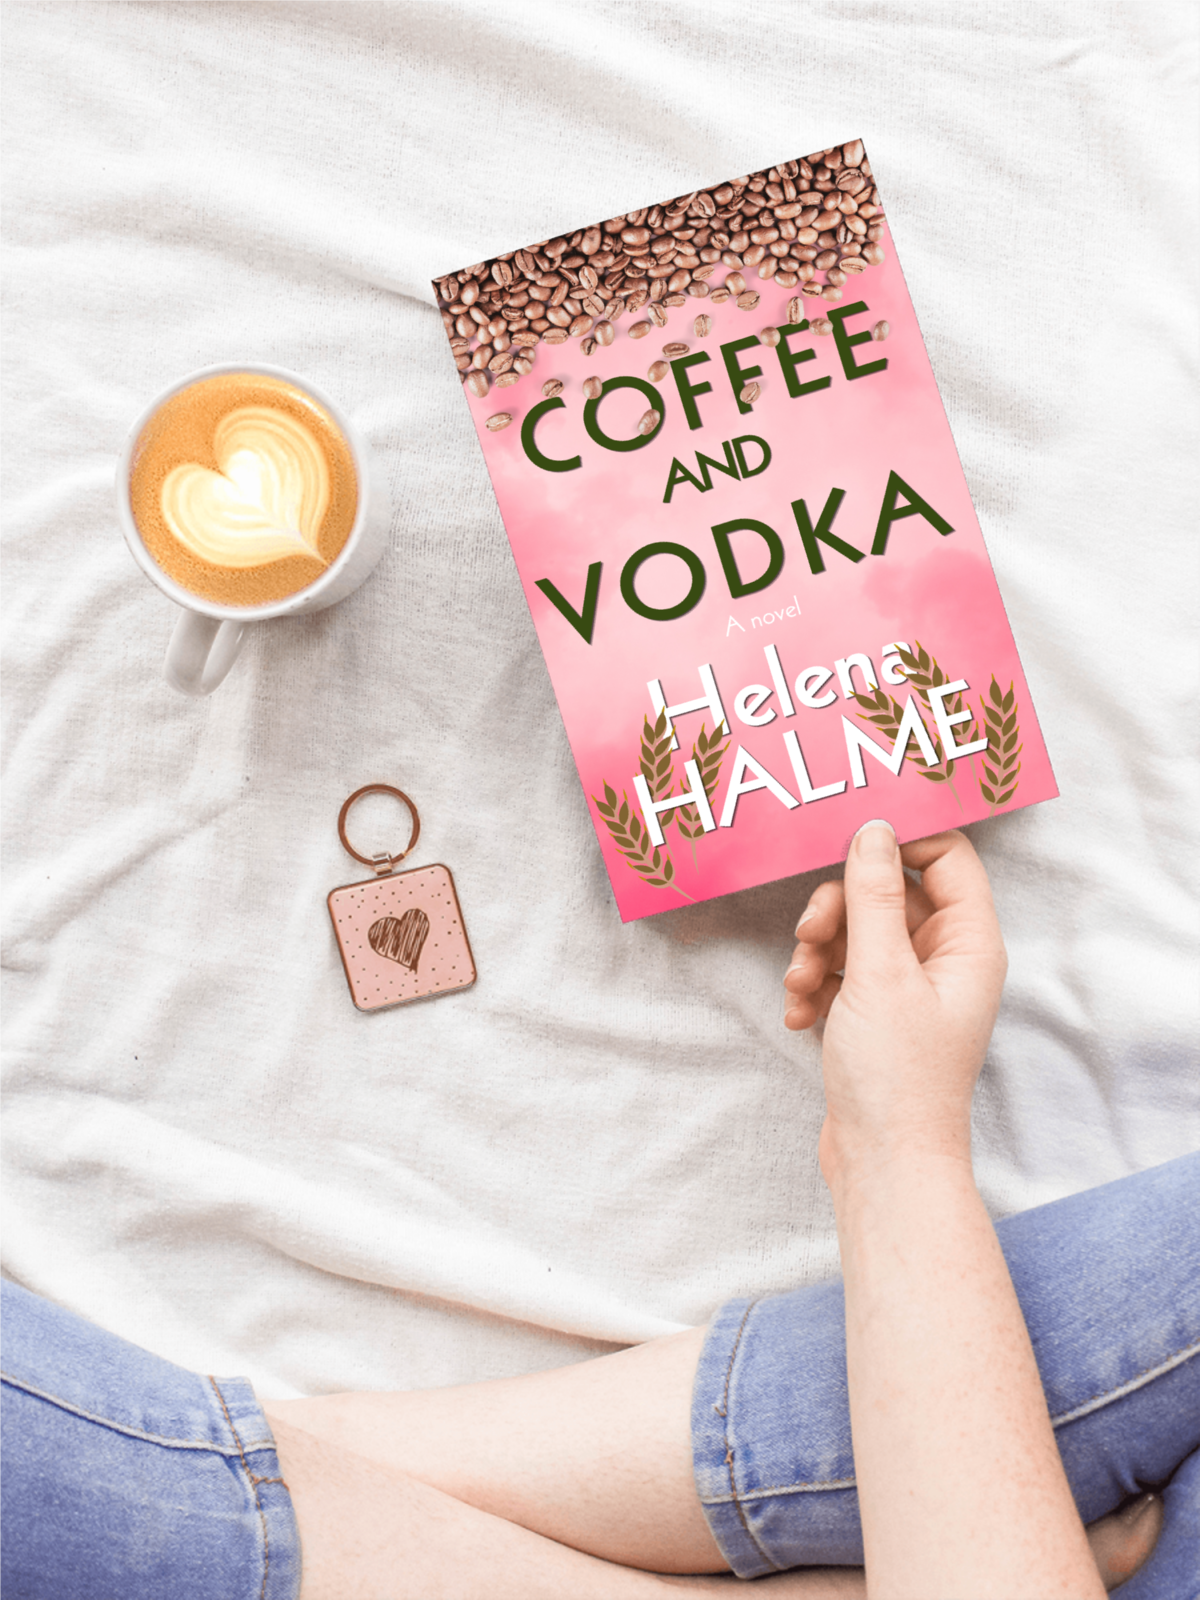 Coffee and Vodka – save 50% when you buy any fiction paperback book in store!